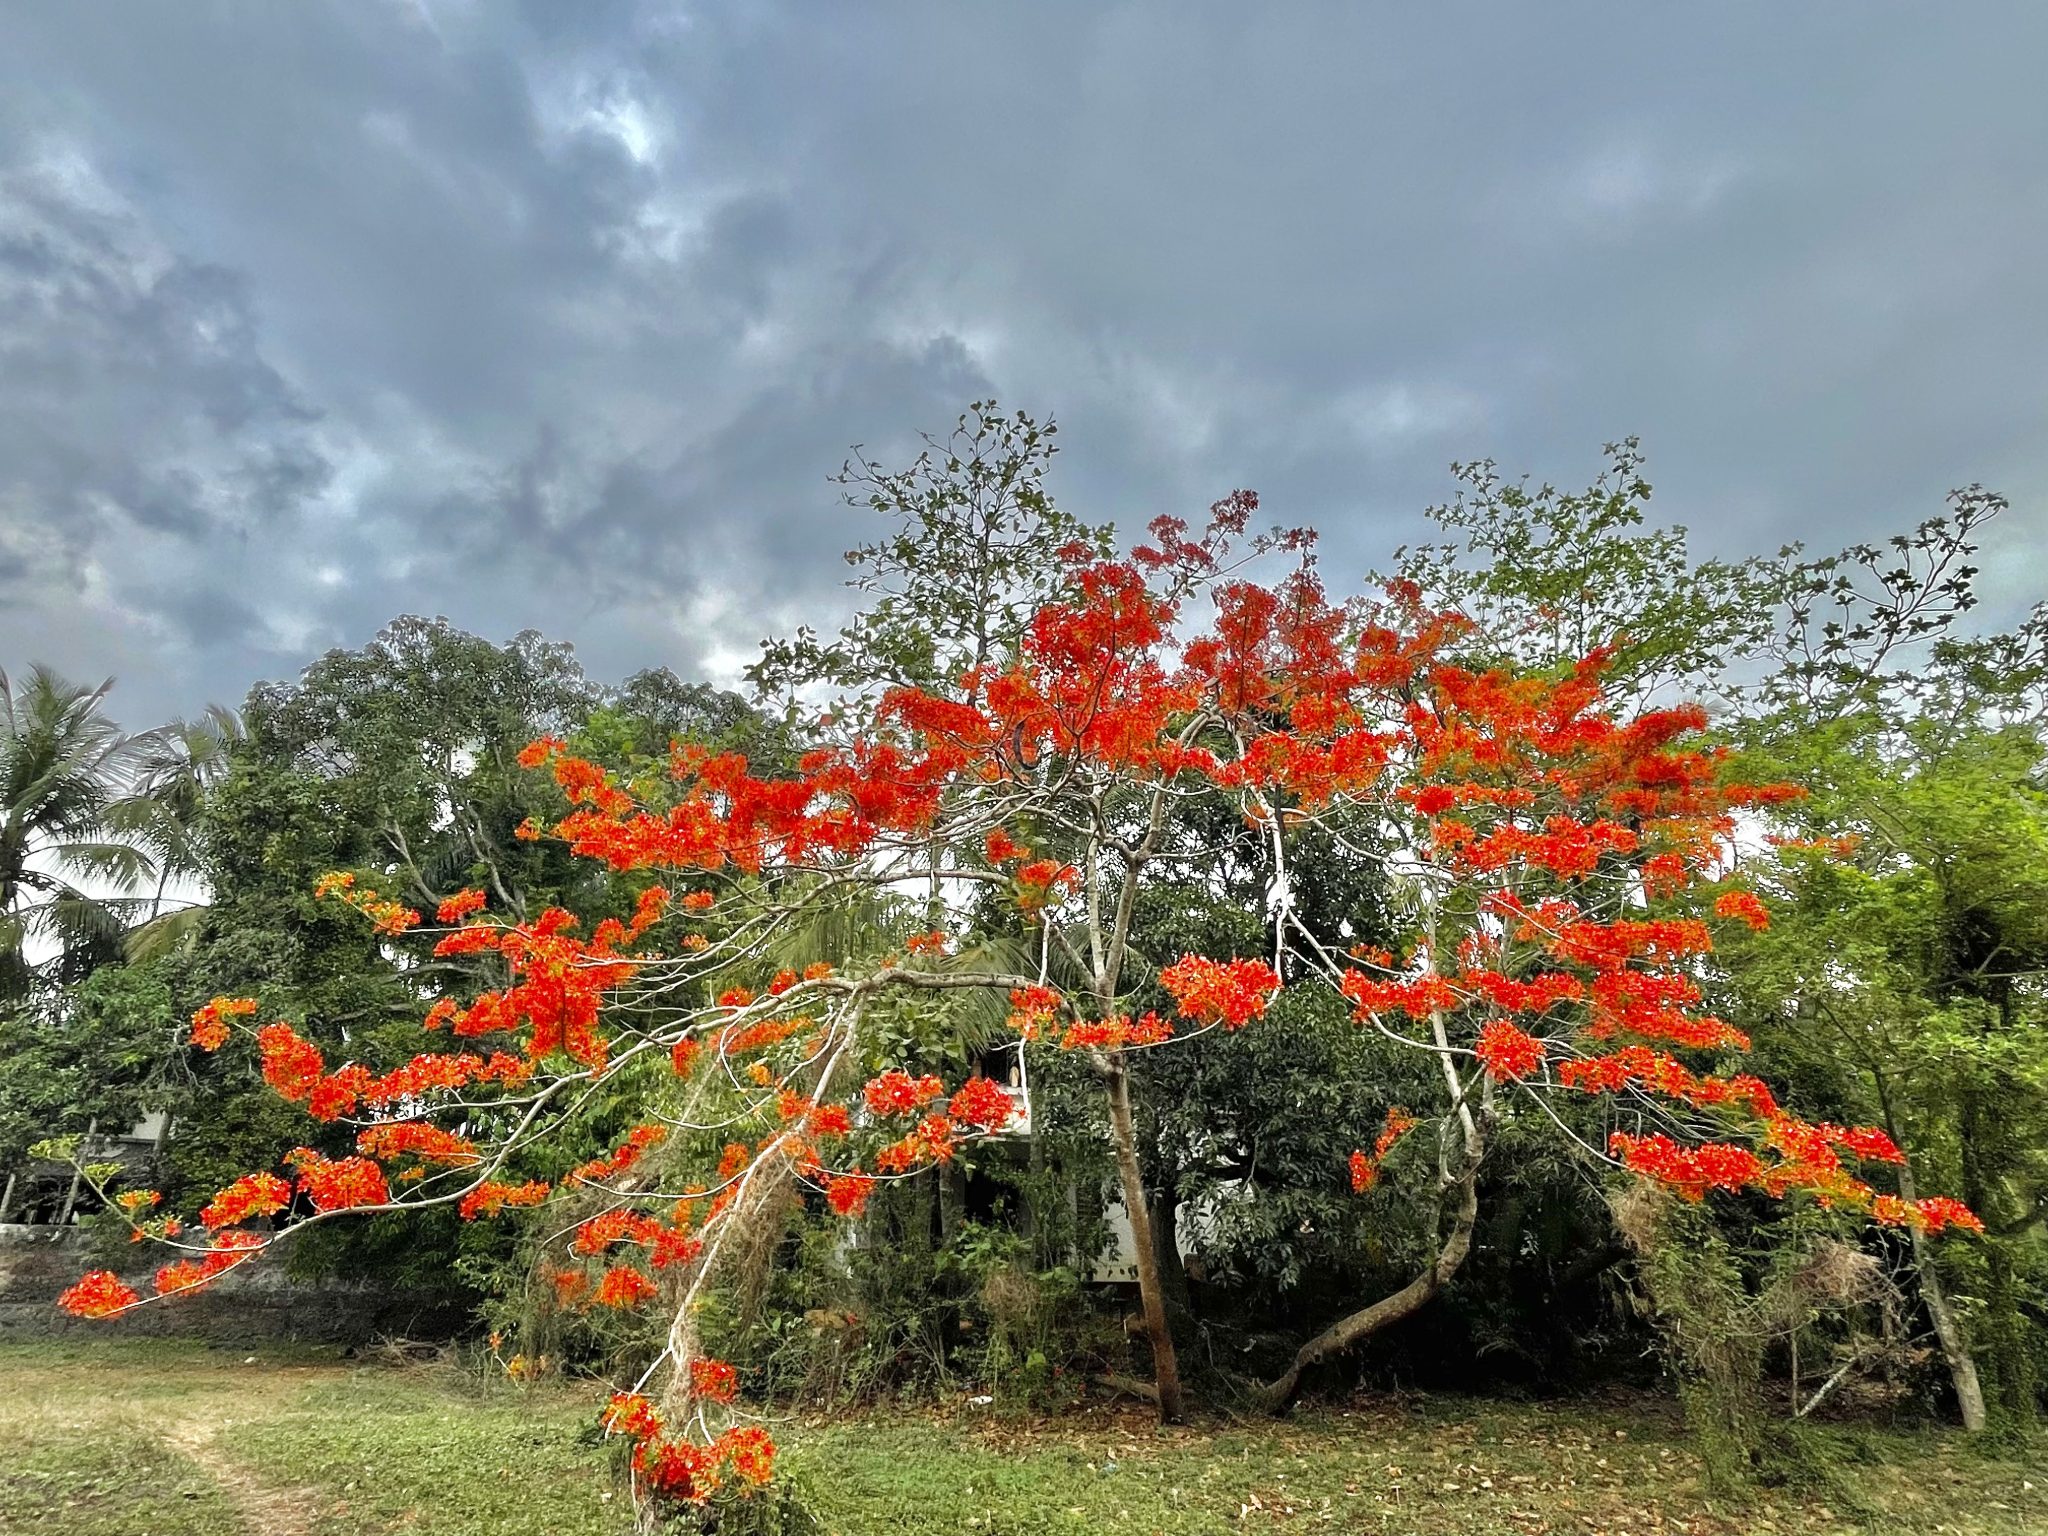 Flower tree. In India this tree is known as Gulmohar aka May flower. Original name is Delonix regia.Native to Madagascar. Normally it flourish in May here.